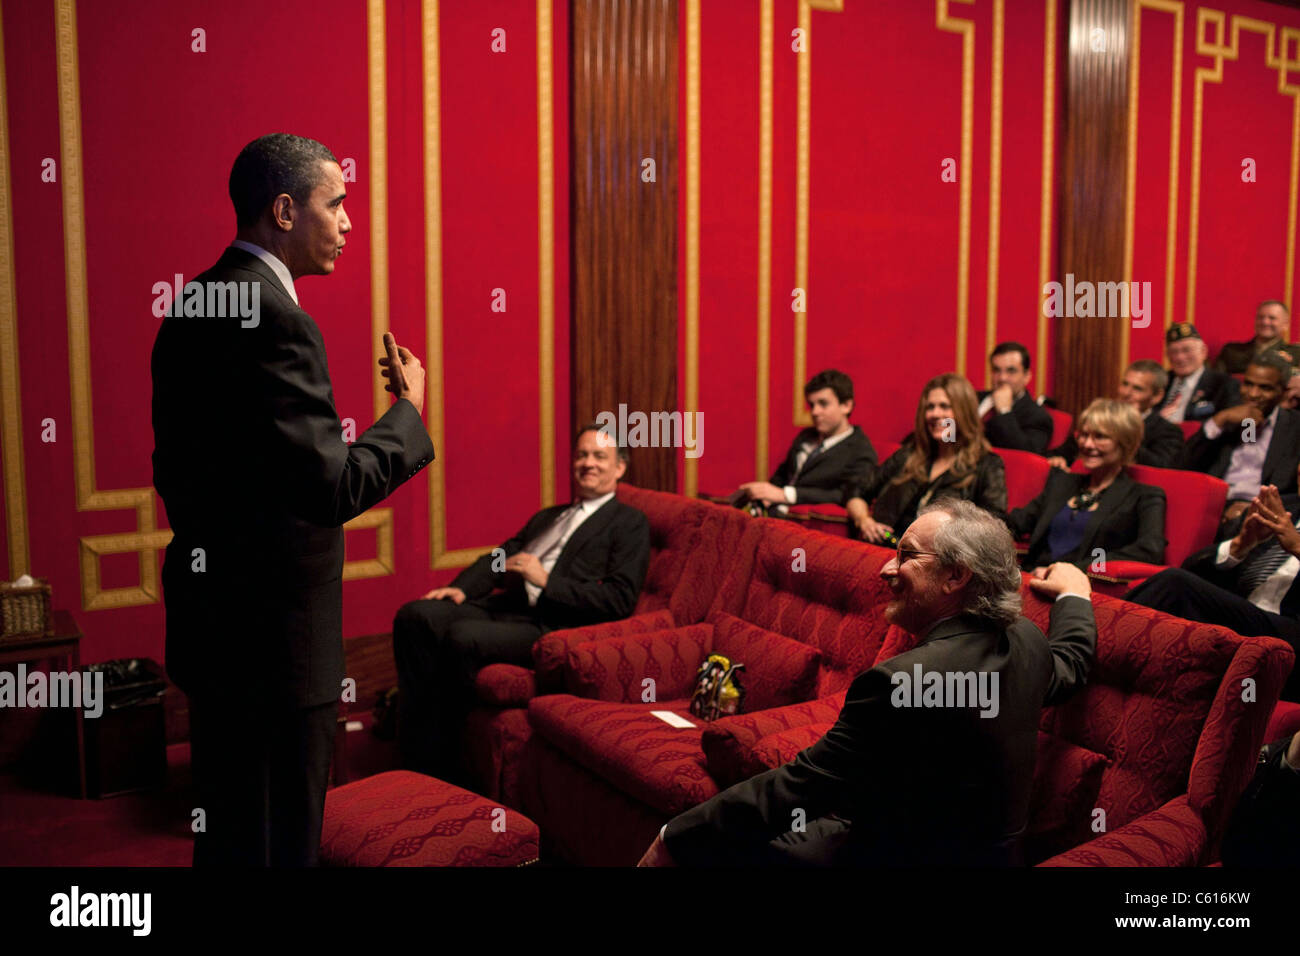 President Barack Obama speaks before a screening of the HBO ten-part World War II miniseries 'The Pacific' in the White House Family Theater. Tom Hanks and Steven Spielberg sit in the front row. March 11 2010., Photo by: Everett Collection(BSLOC 2011 7 37) Stock Photo